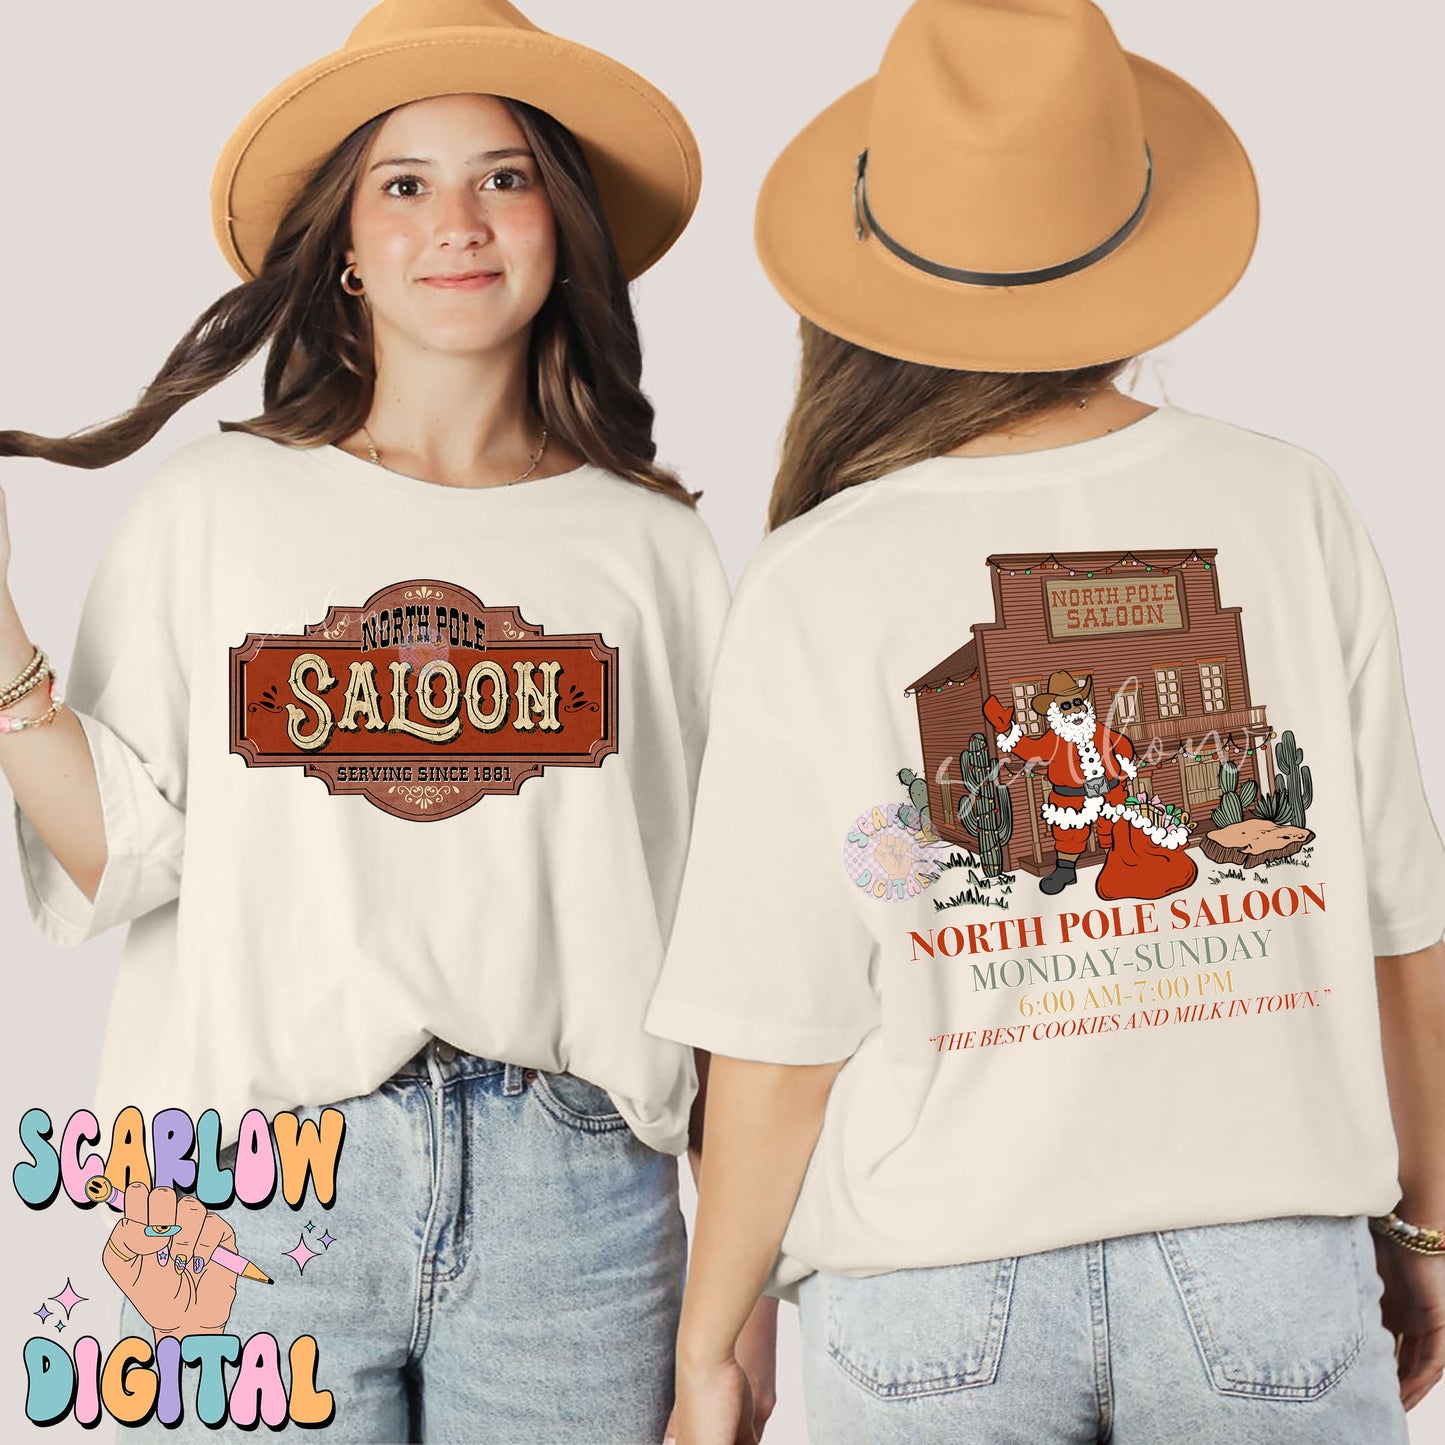 North Pole Saloon PNG Front and Back Bundle-Christmas Sublimation Digital Design Download-western christmas png, country santa claus png